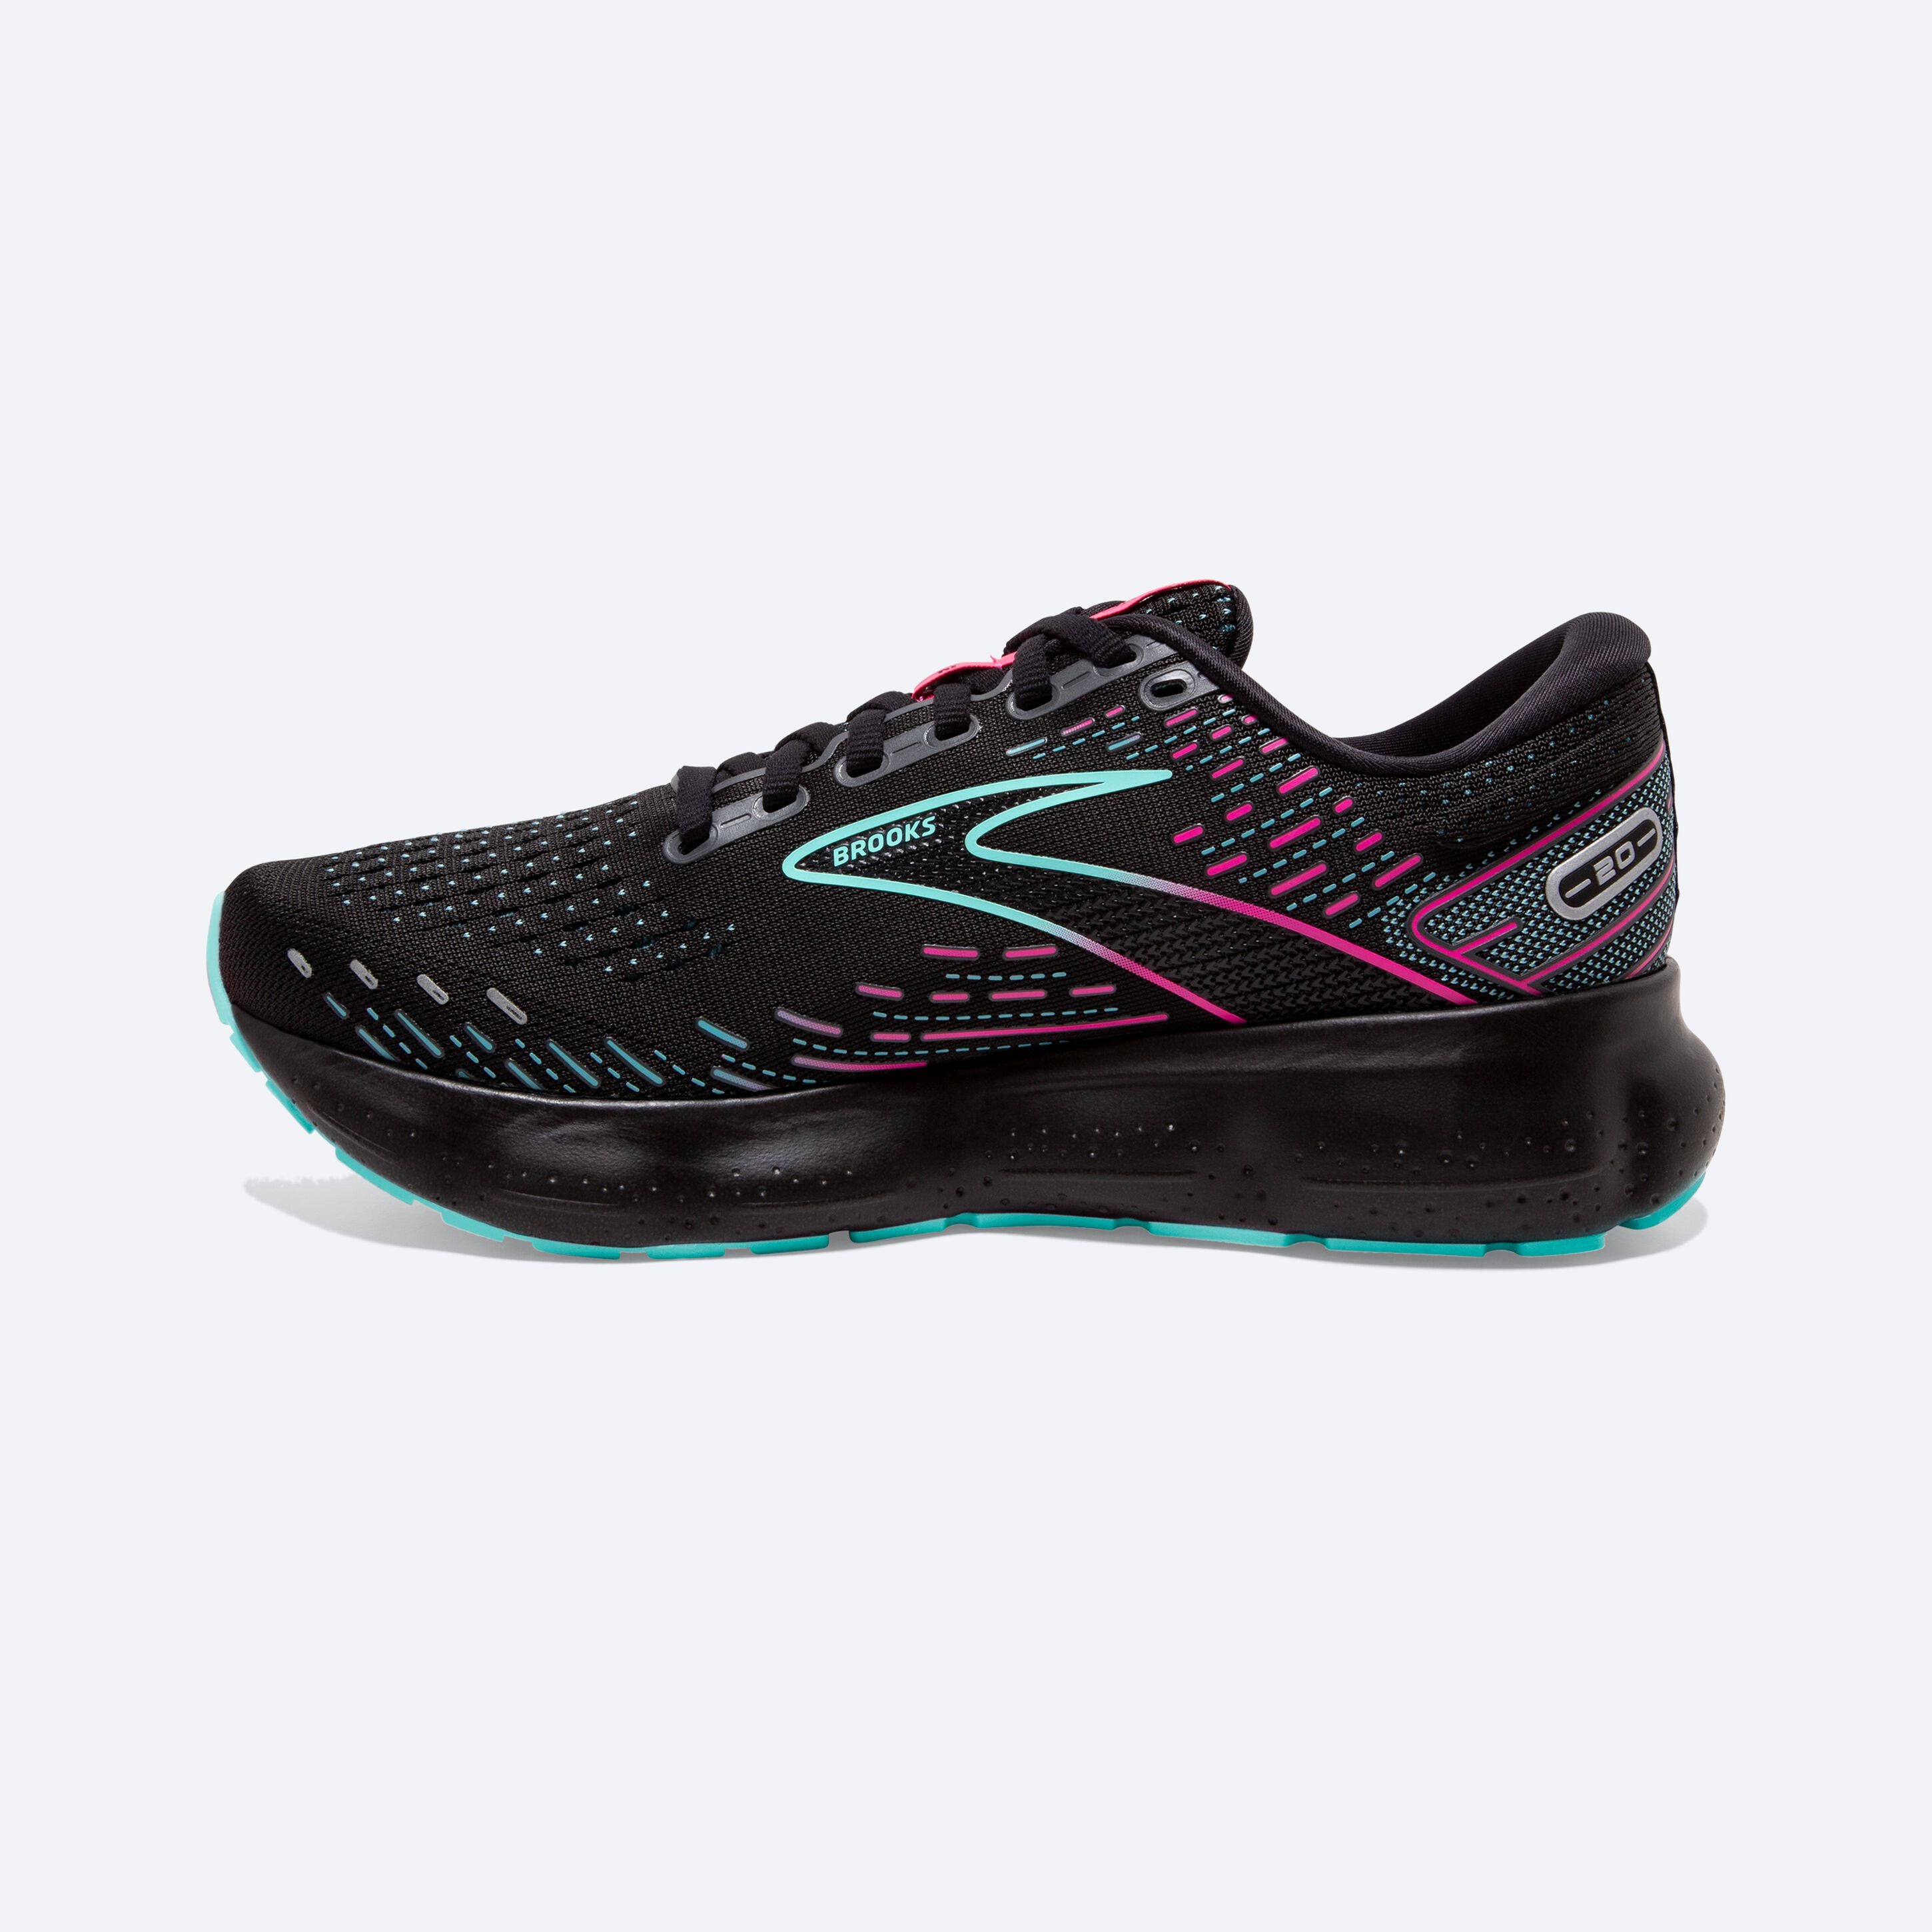 Medial view of the Women's Glycerin 20 in Black/Blue Light/Pink